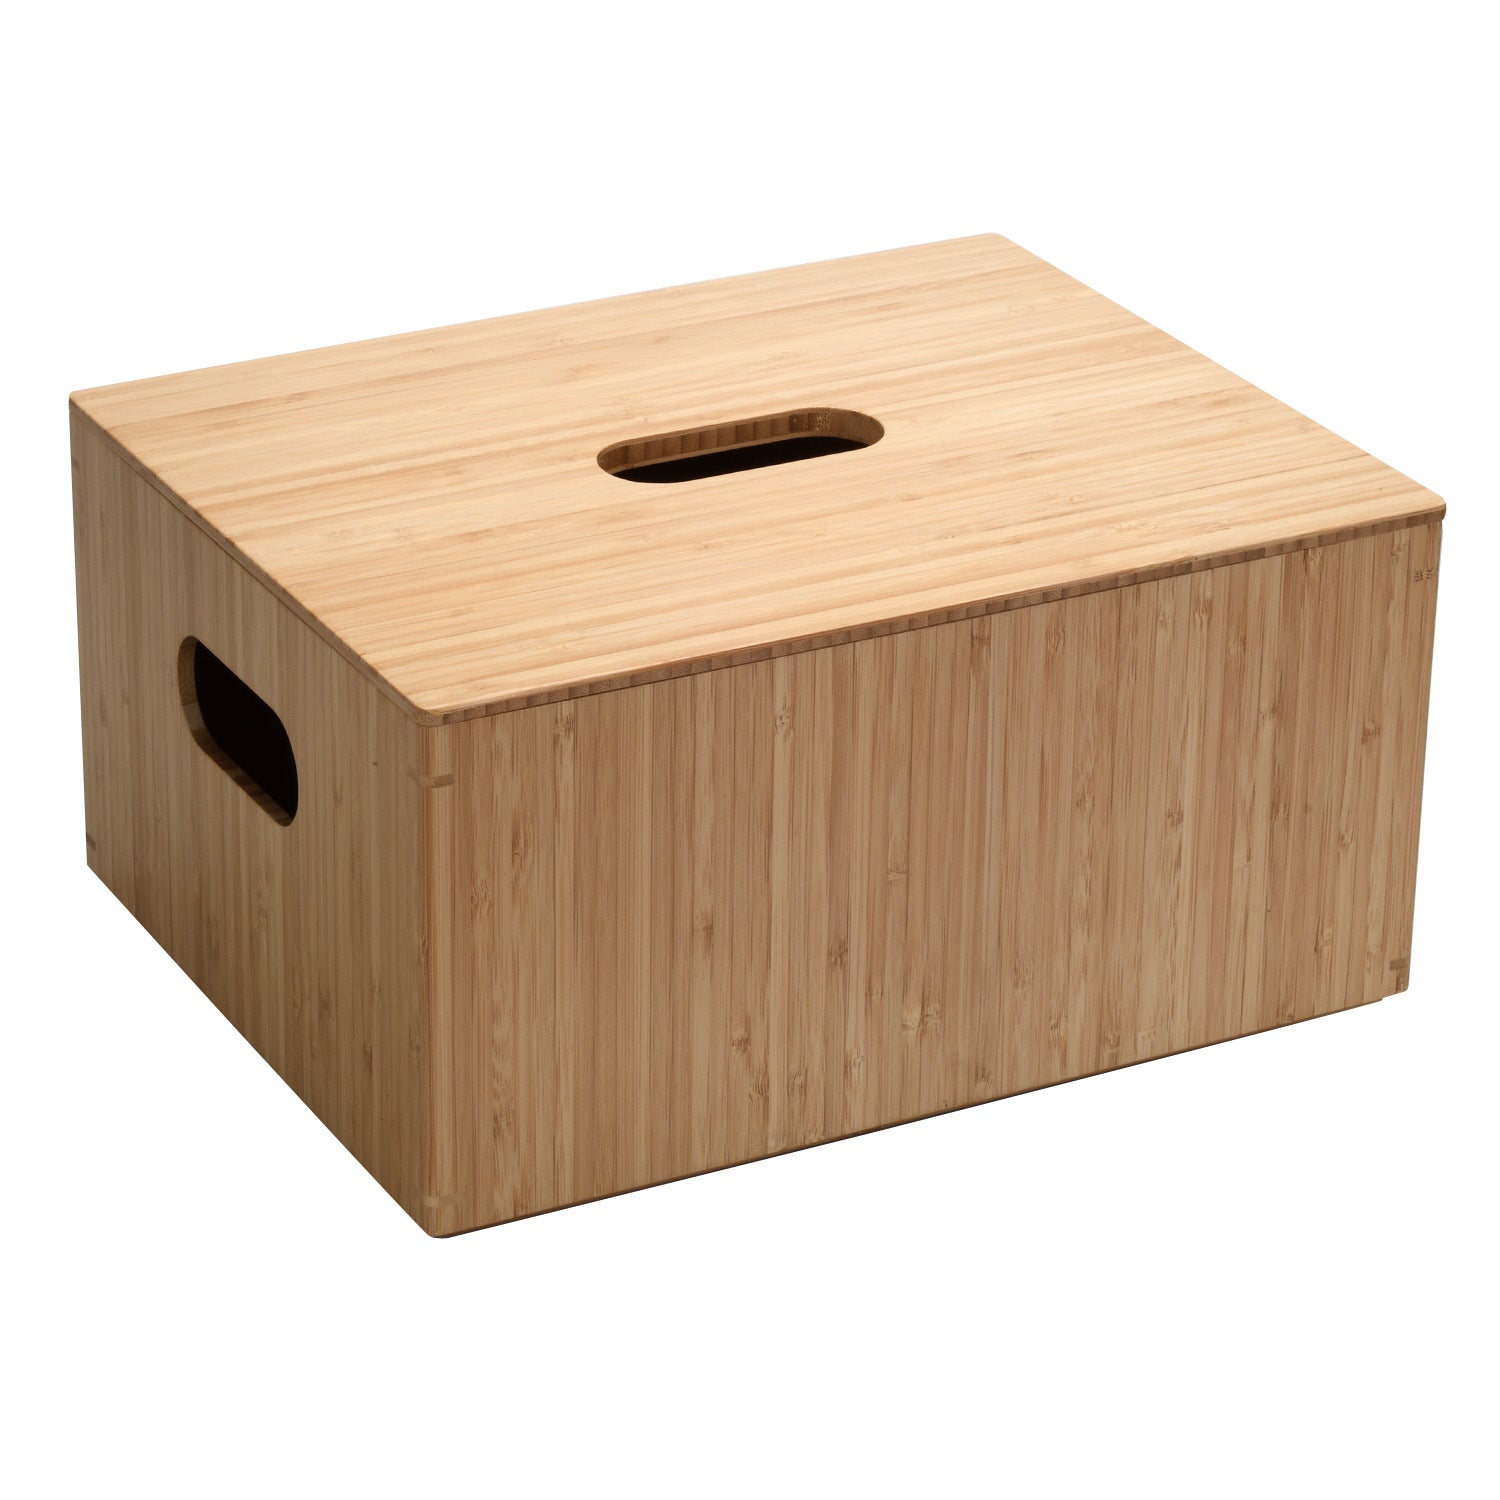 Bamboo Large Storage Box with Lid Included - MobilevisionUS